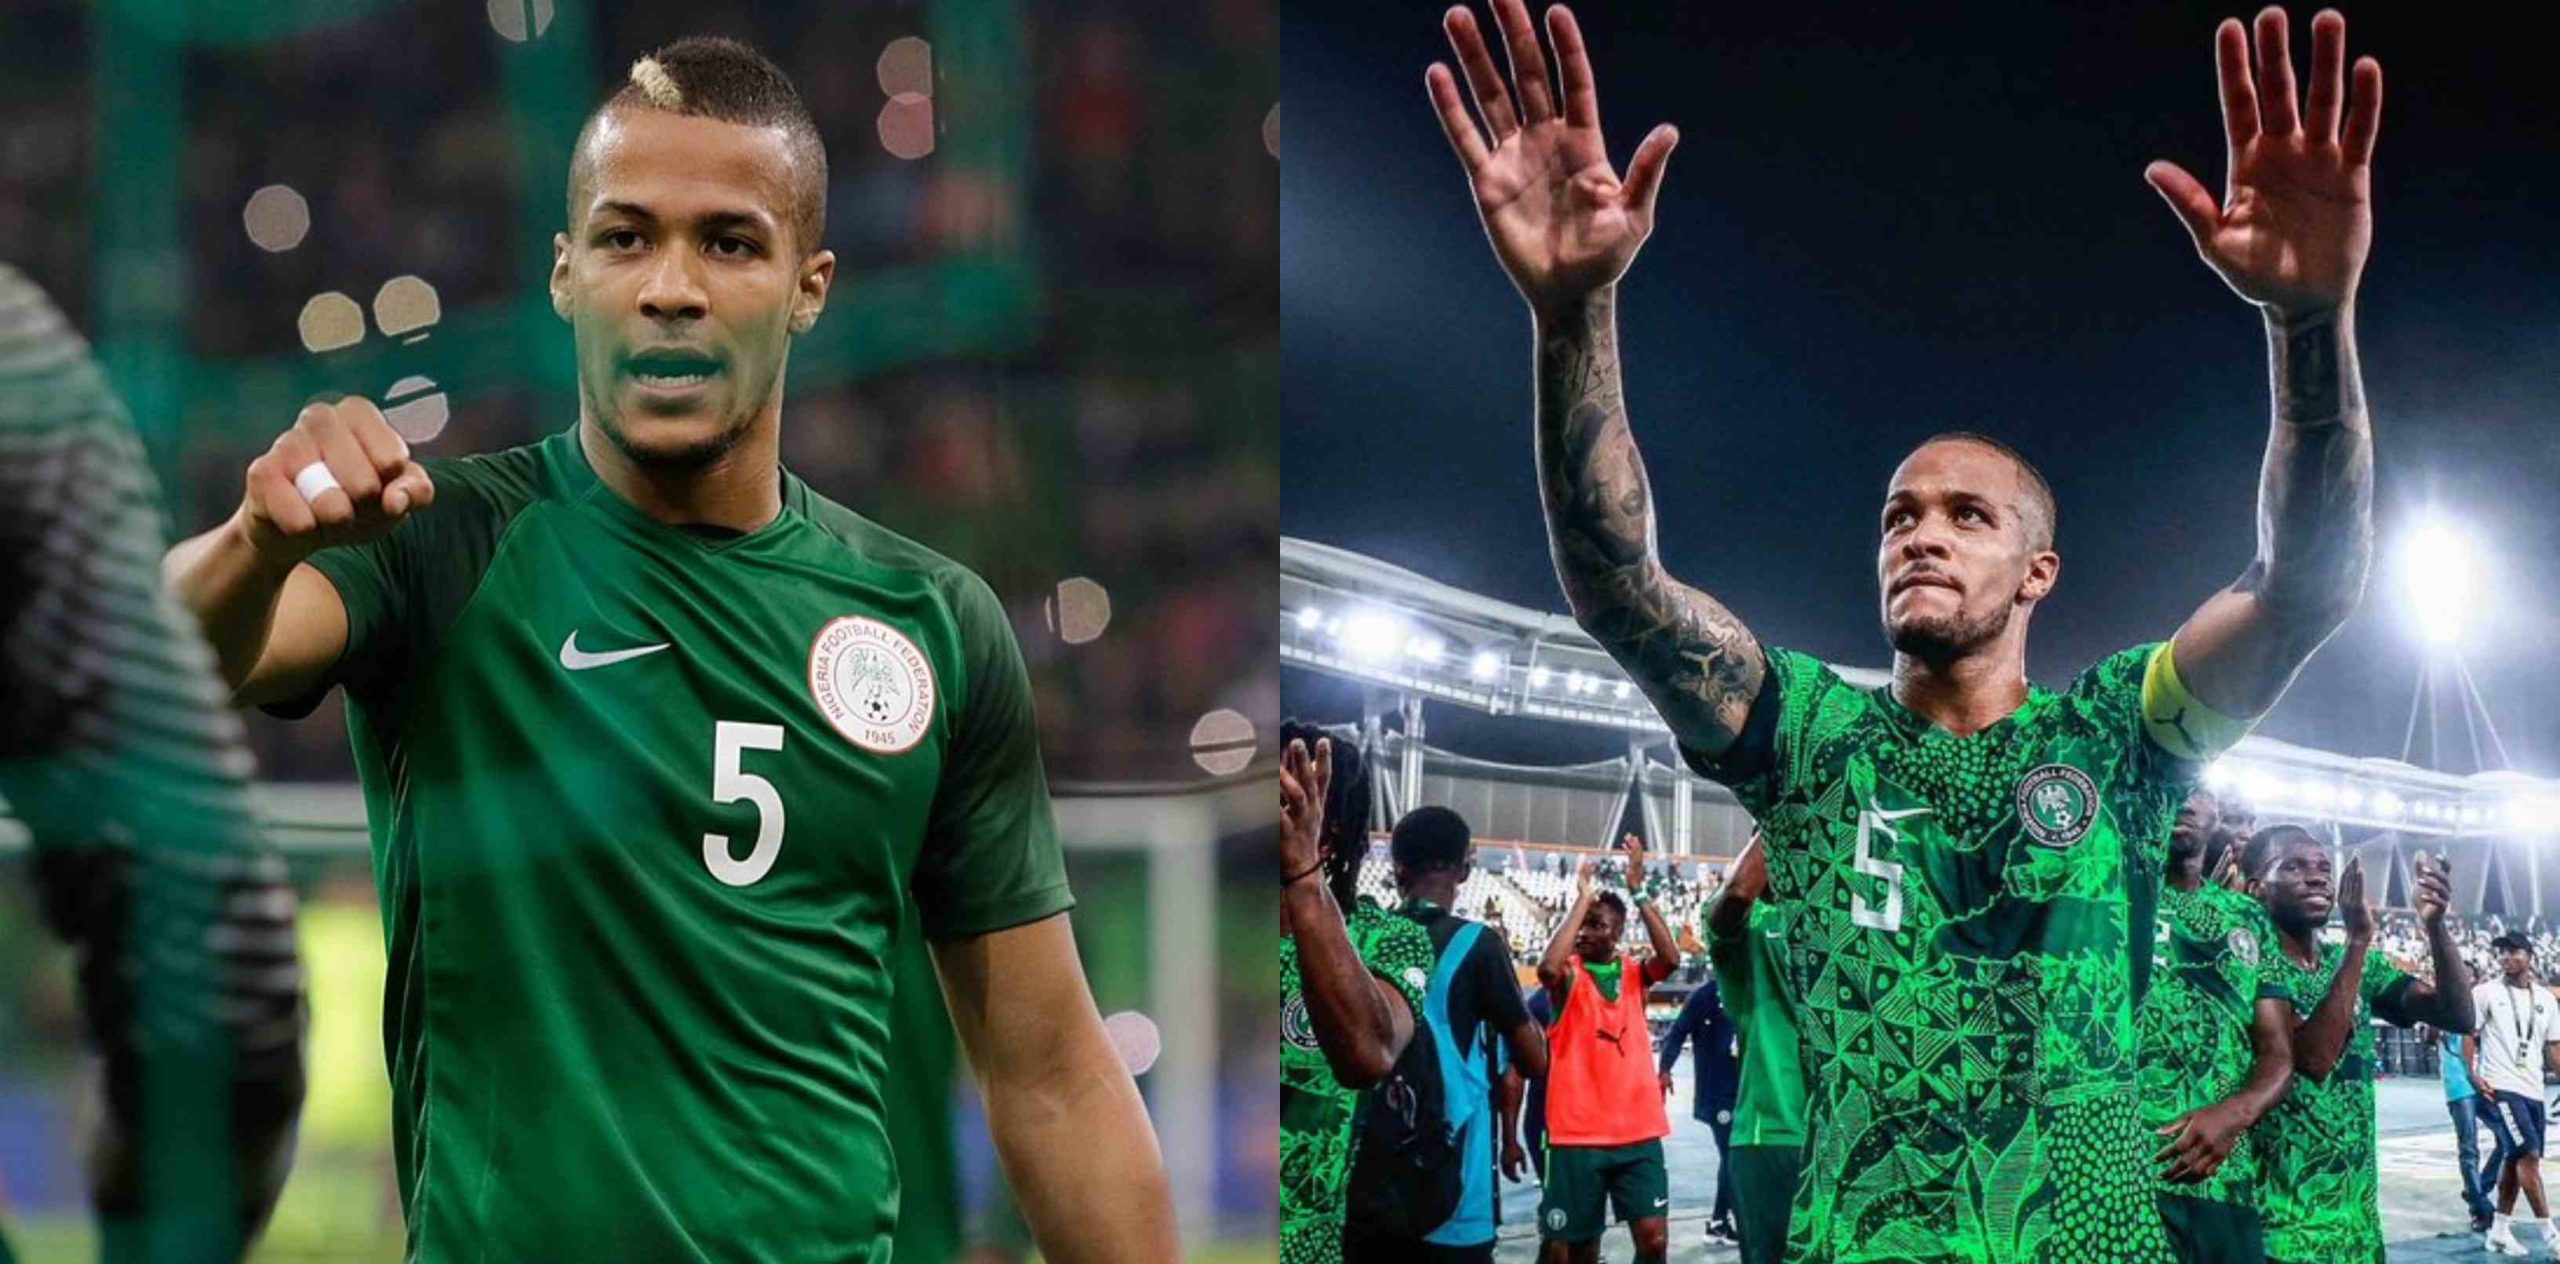 Who is William Troost Ekong